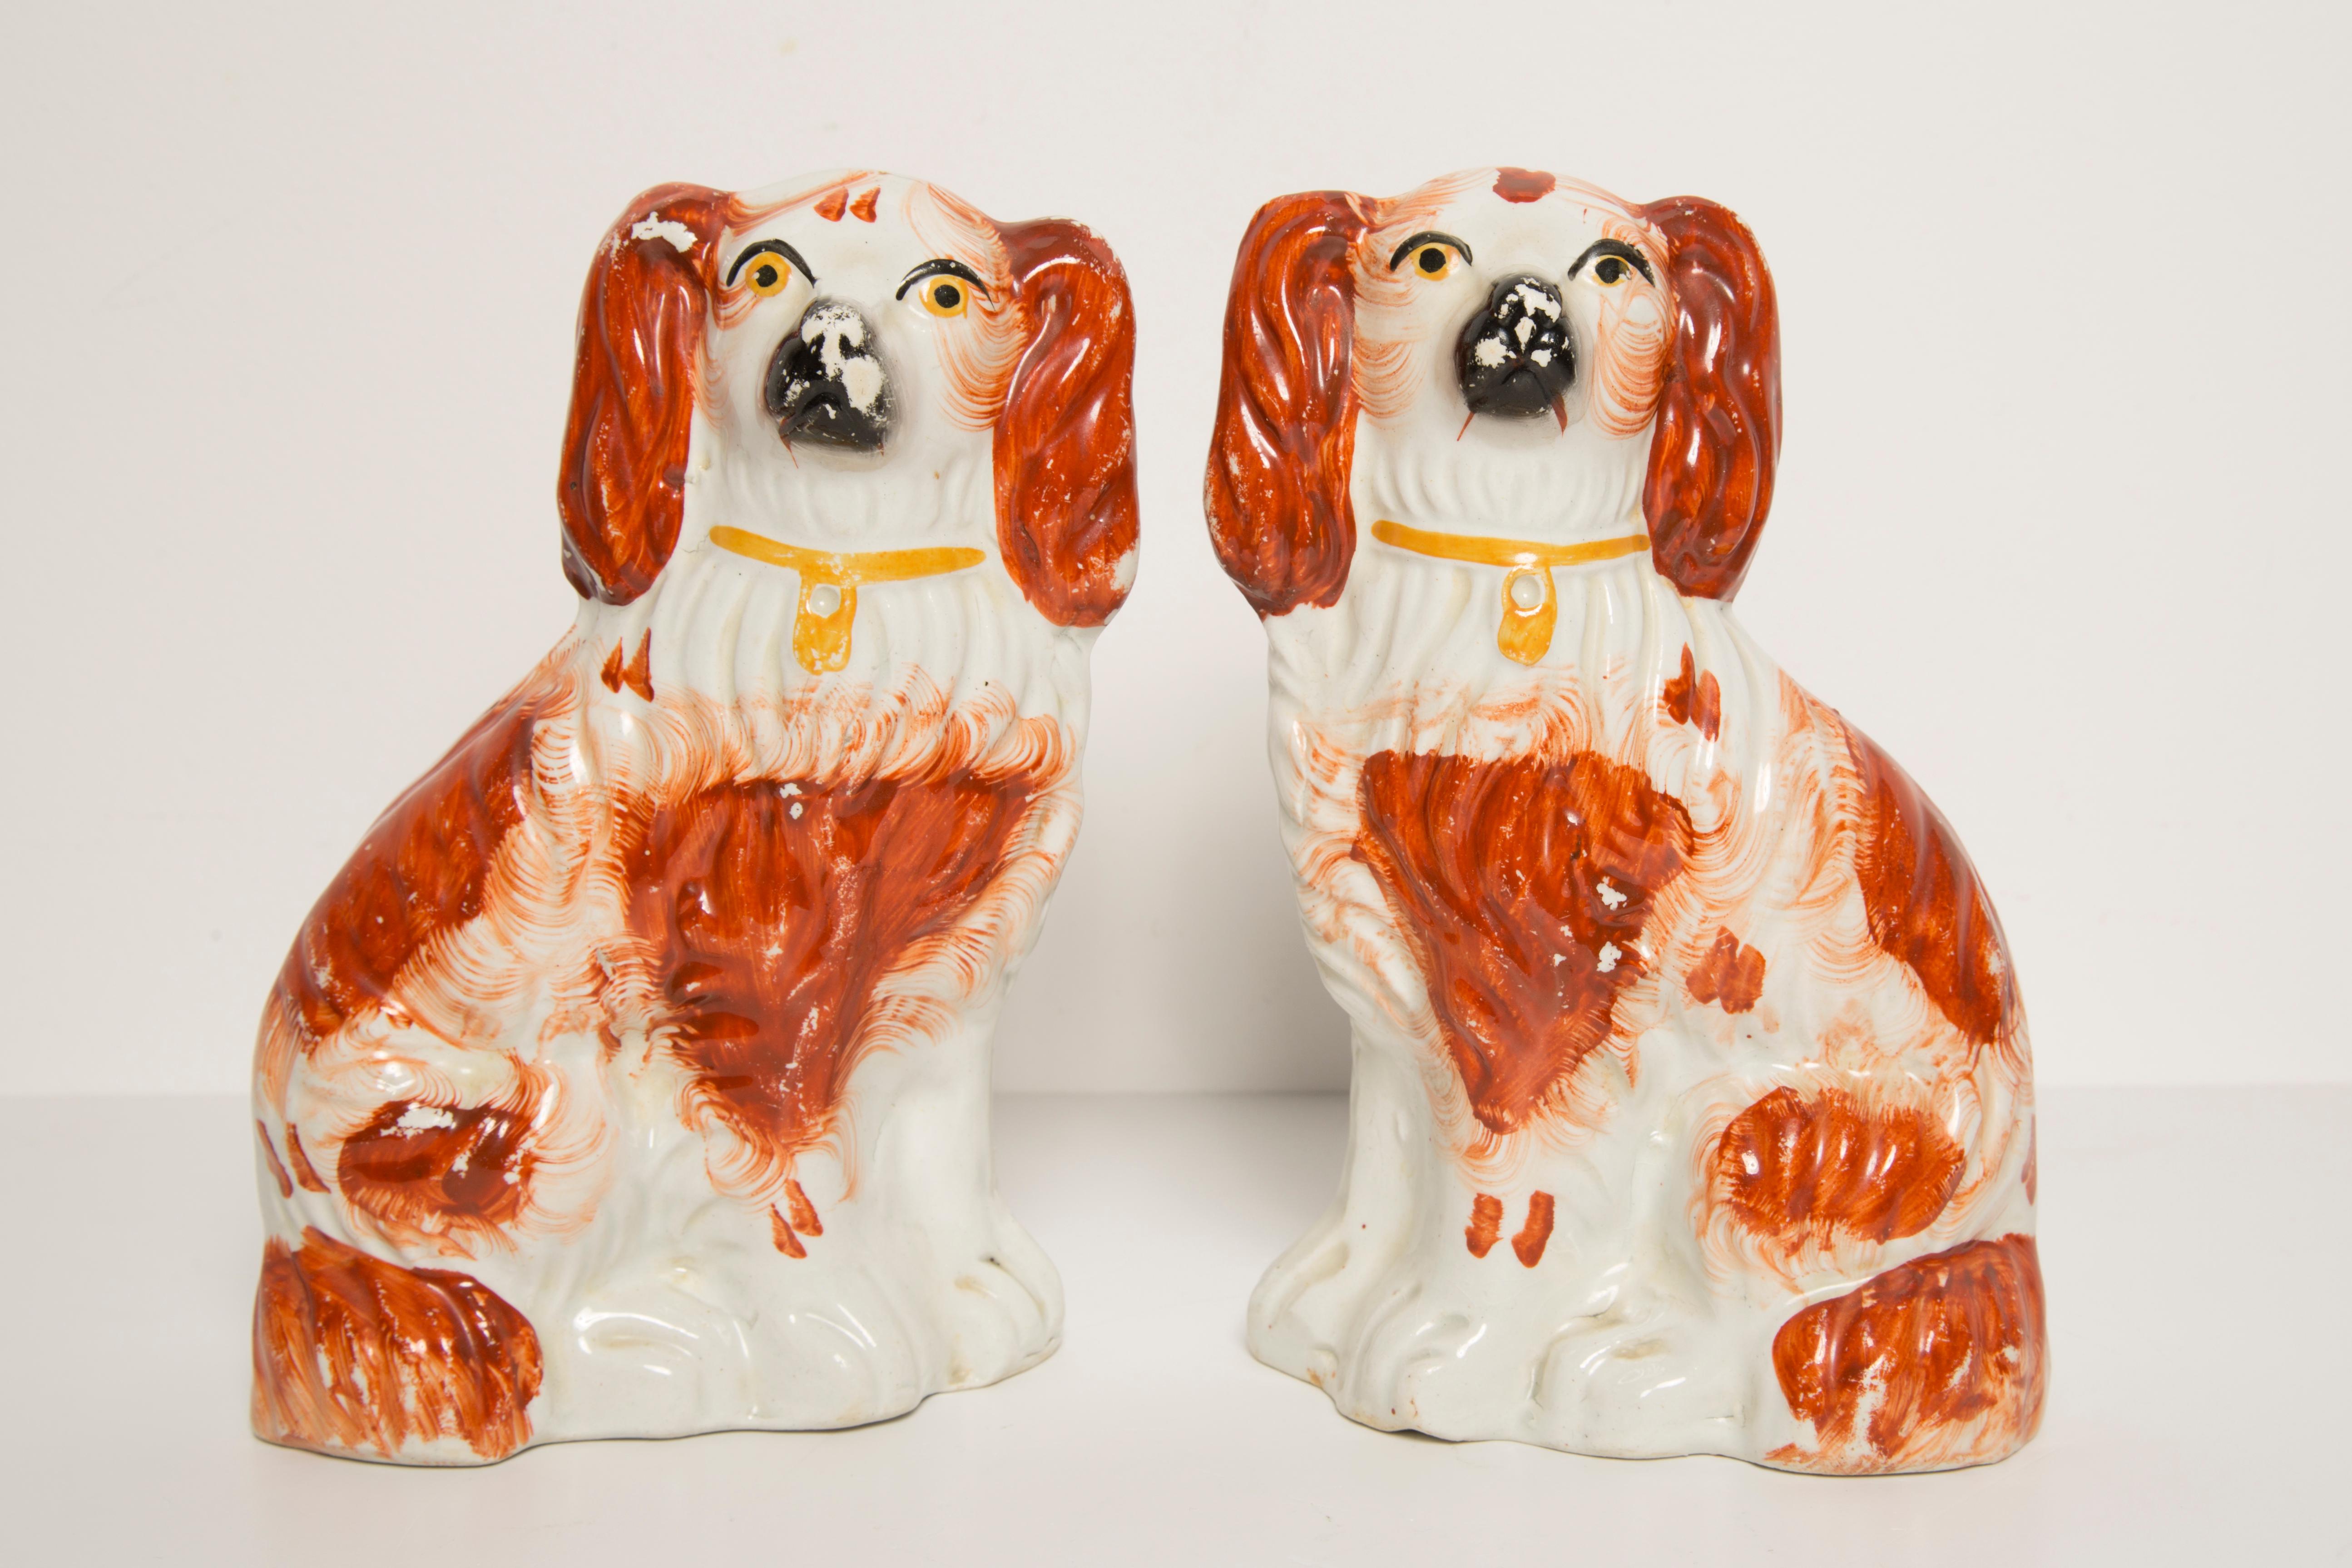 Painted ceramic, good original vintage condition. Beautiful and unique decorative sculptures. Spaniel Dogs Sculpture was produced in Staffordshire, England in 1960s. Only one pair of dogs are available.